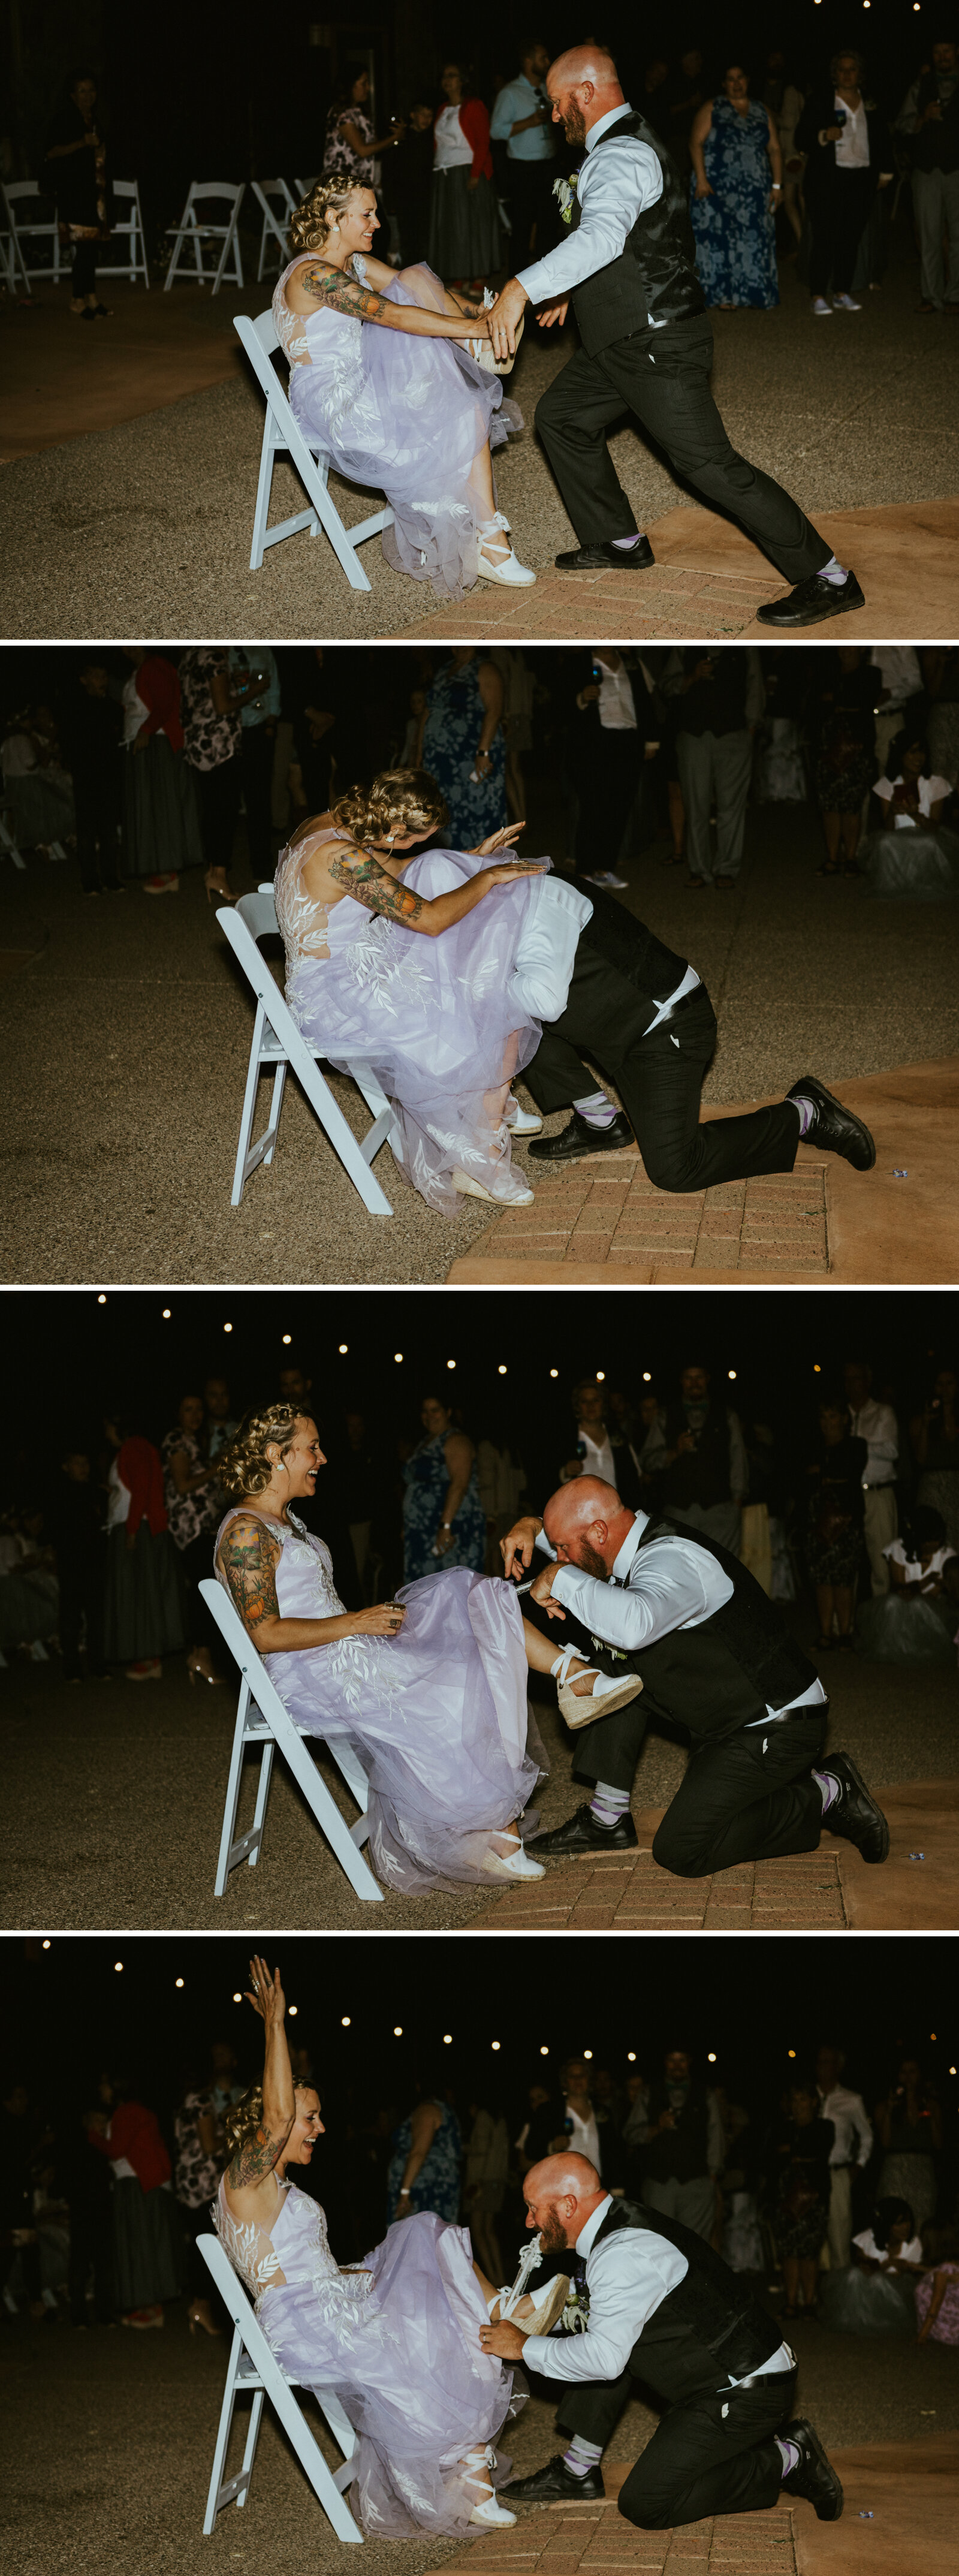 a groom taking his new wife's garter off during their wedding reception.jpg